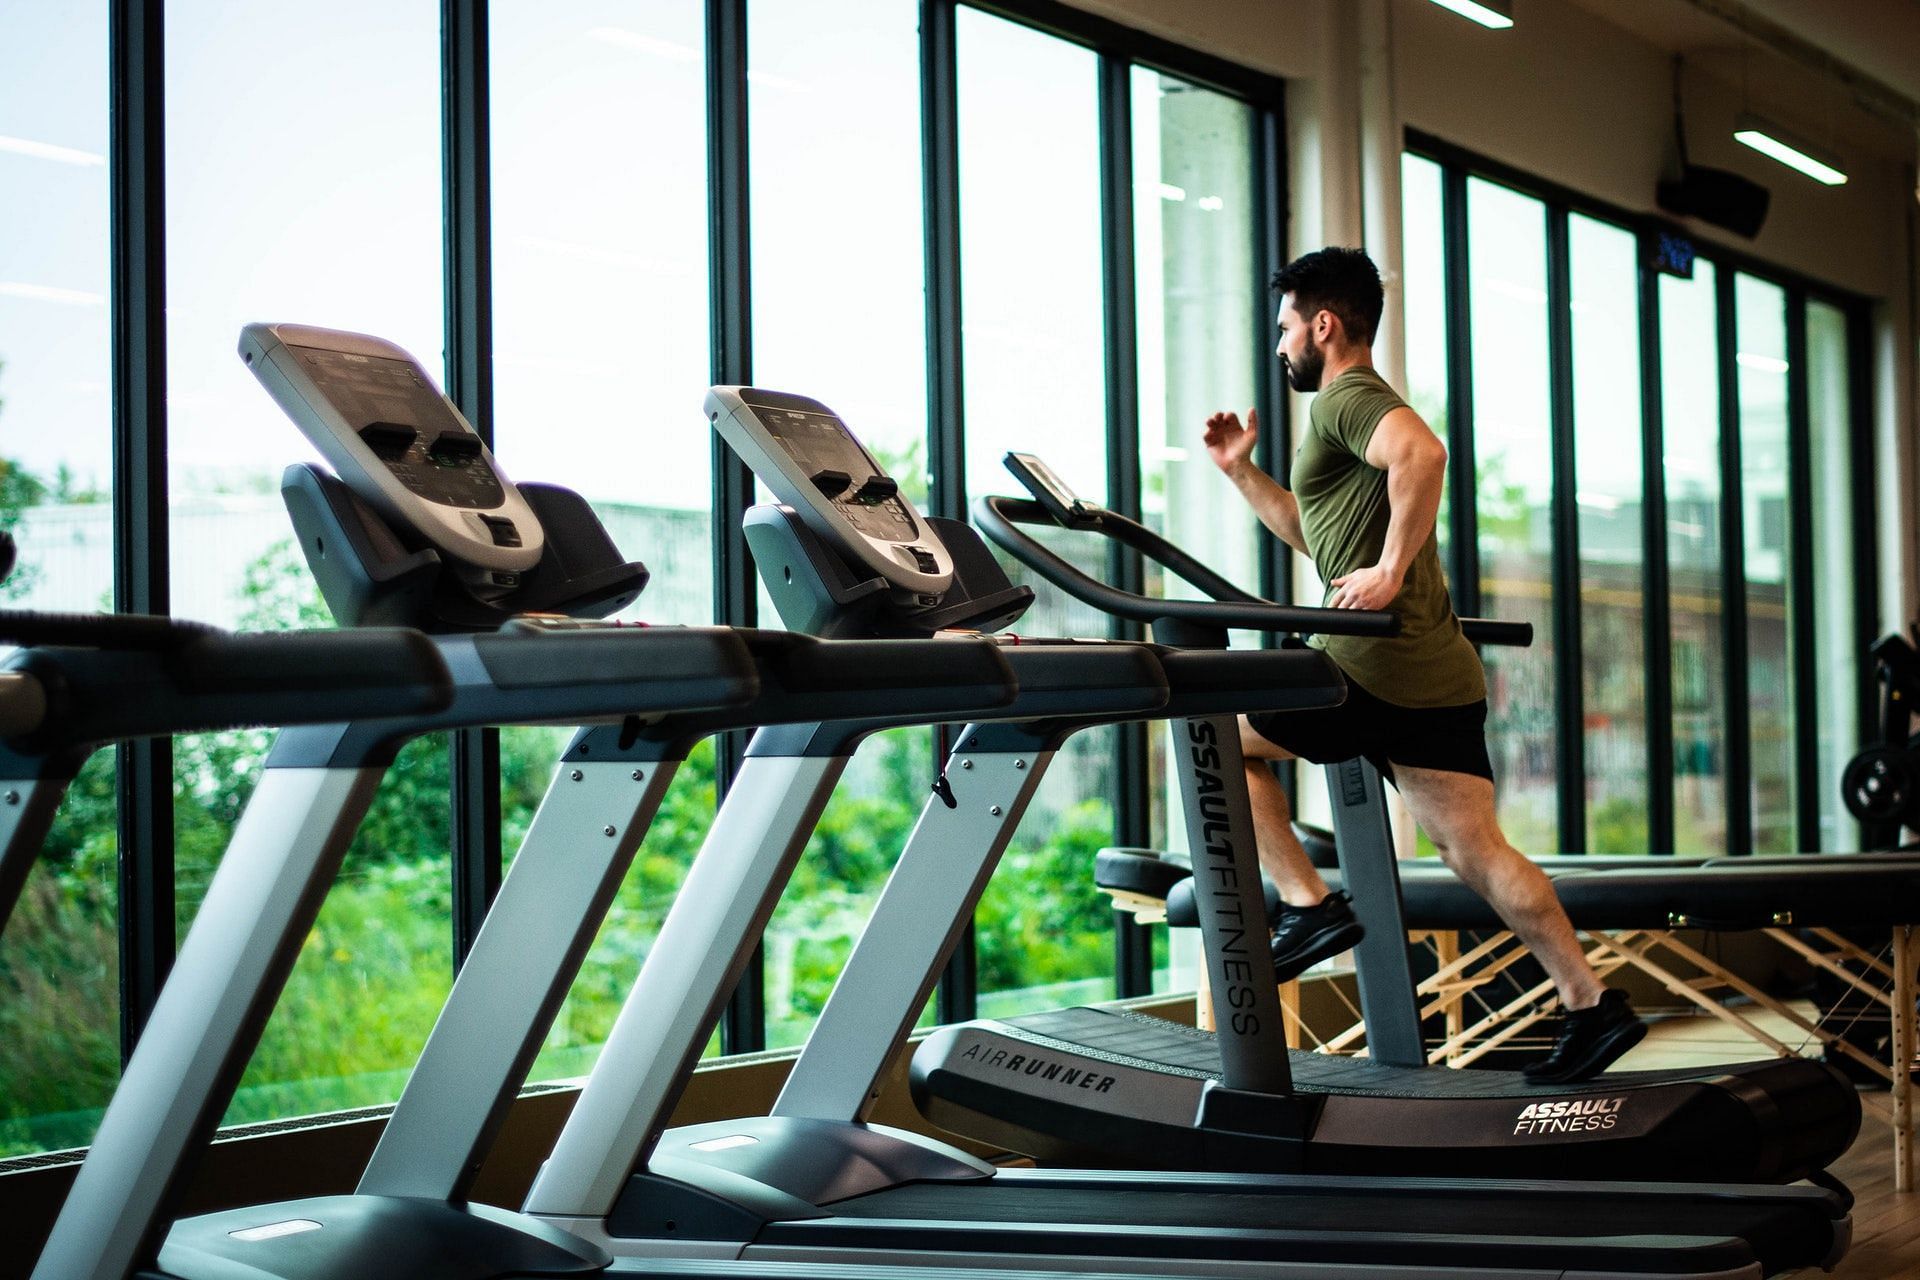 Running on a treadmill offers a wide variety of health benefits (Image via William Choquette/pexels)